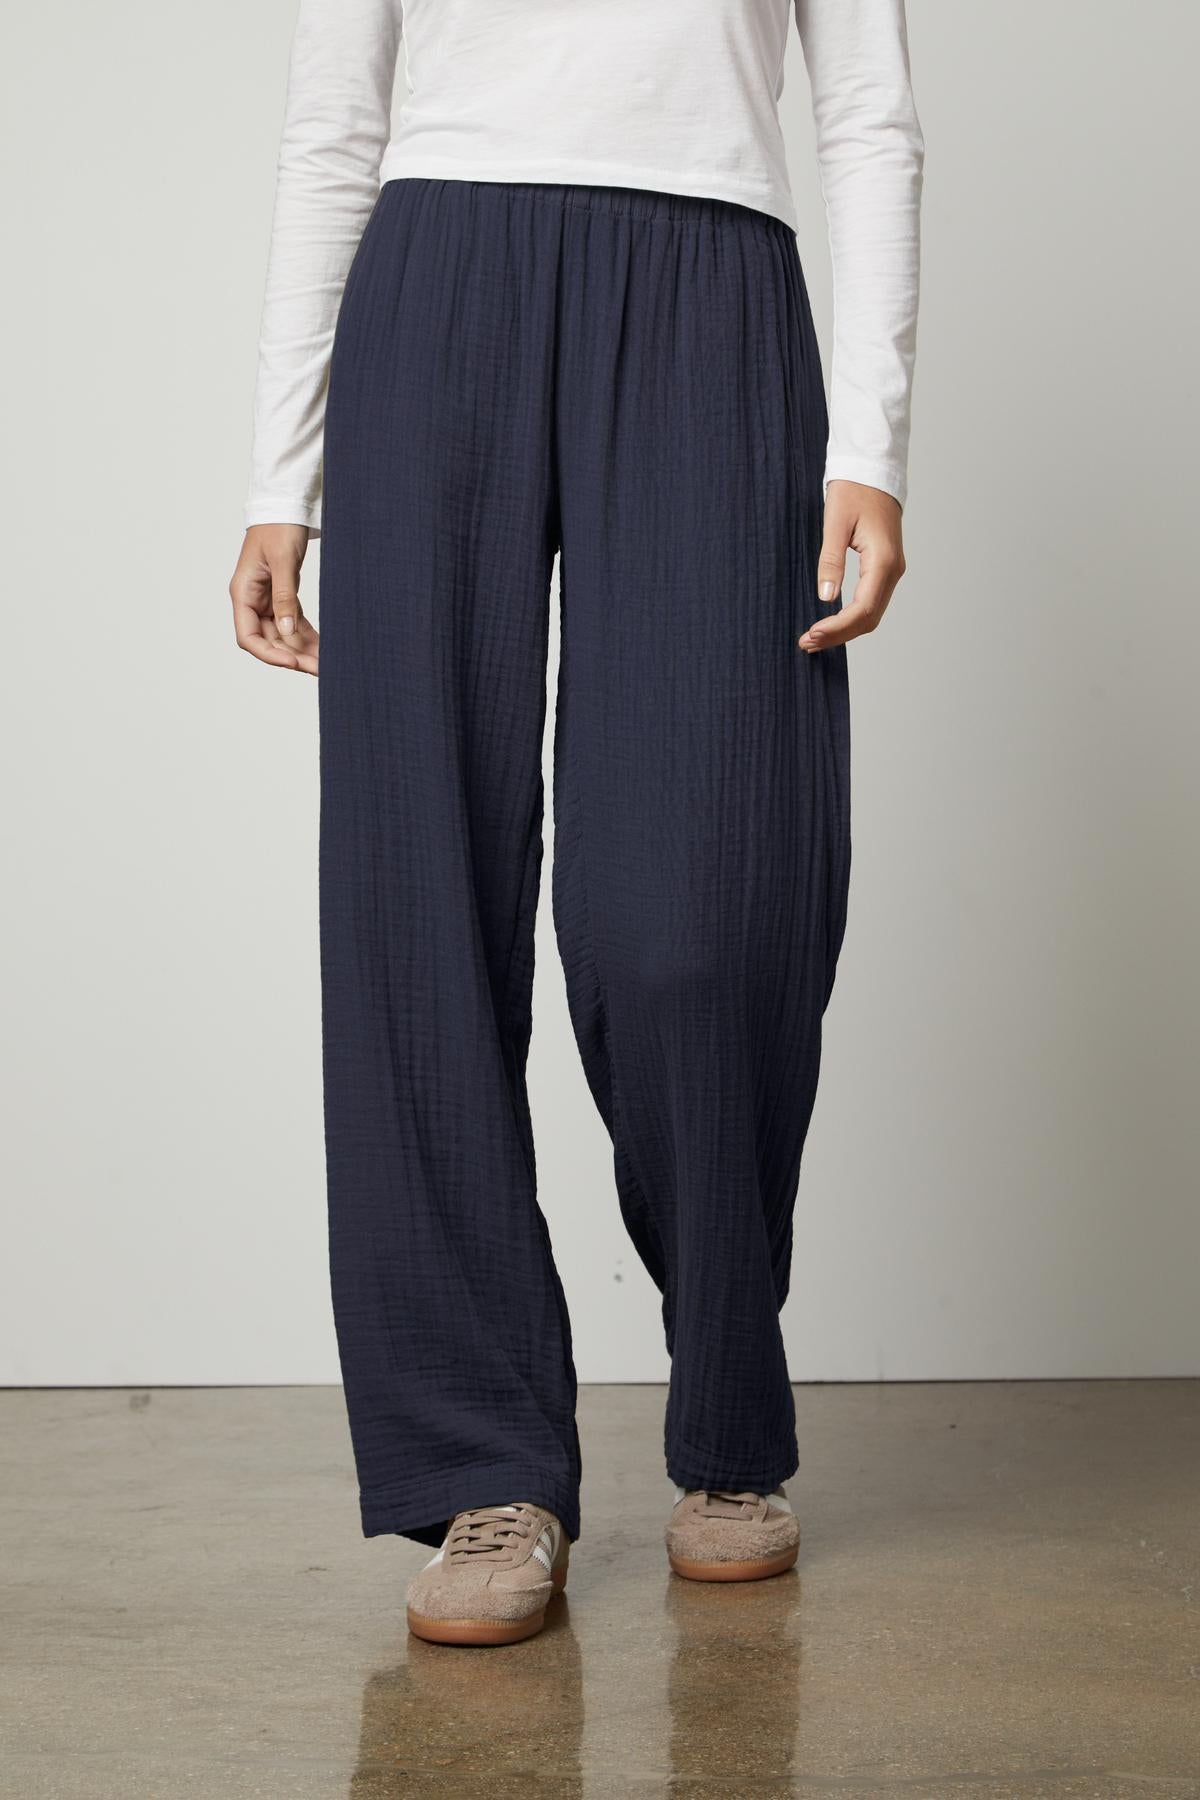 A woman wearing Velvet by Graham & Spencer navy JERRY COTTON GAUZE PANT straight leg pants with an elastic waistband and a white t-shirt.-35660385124545